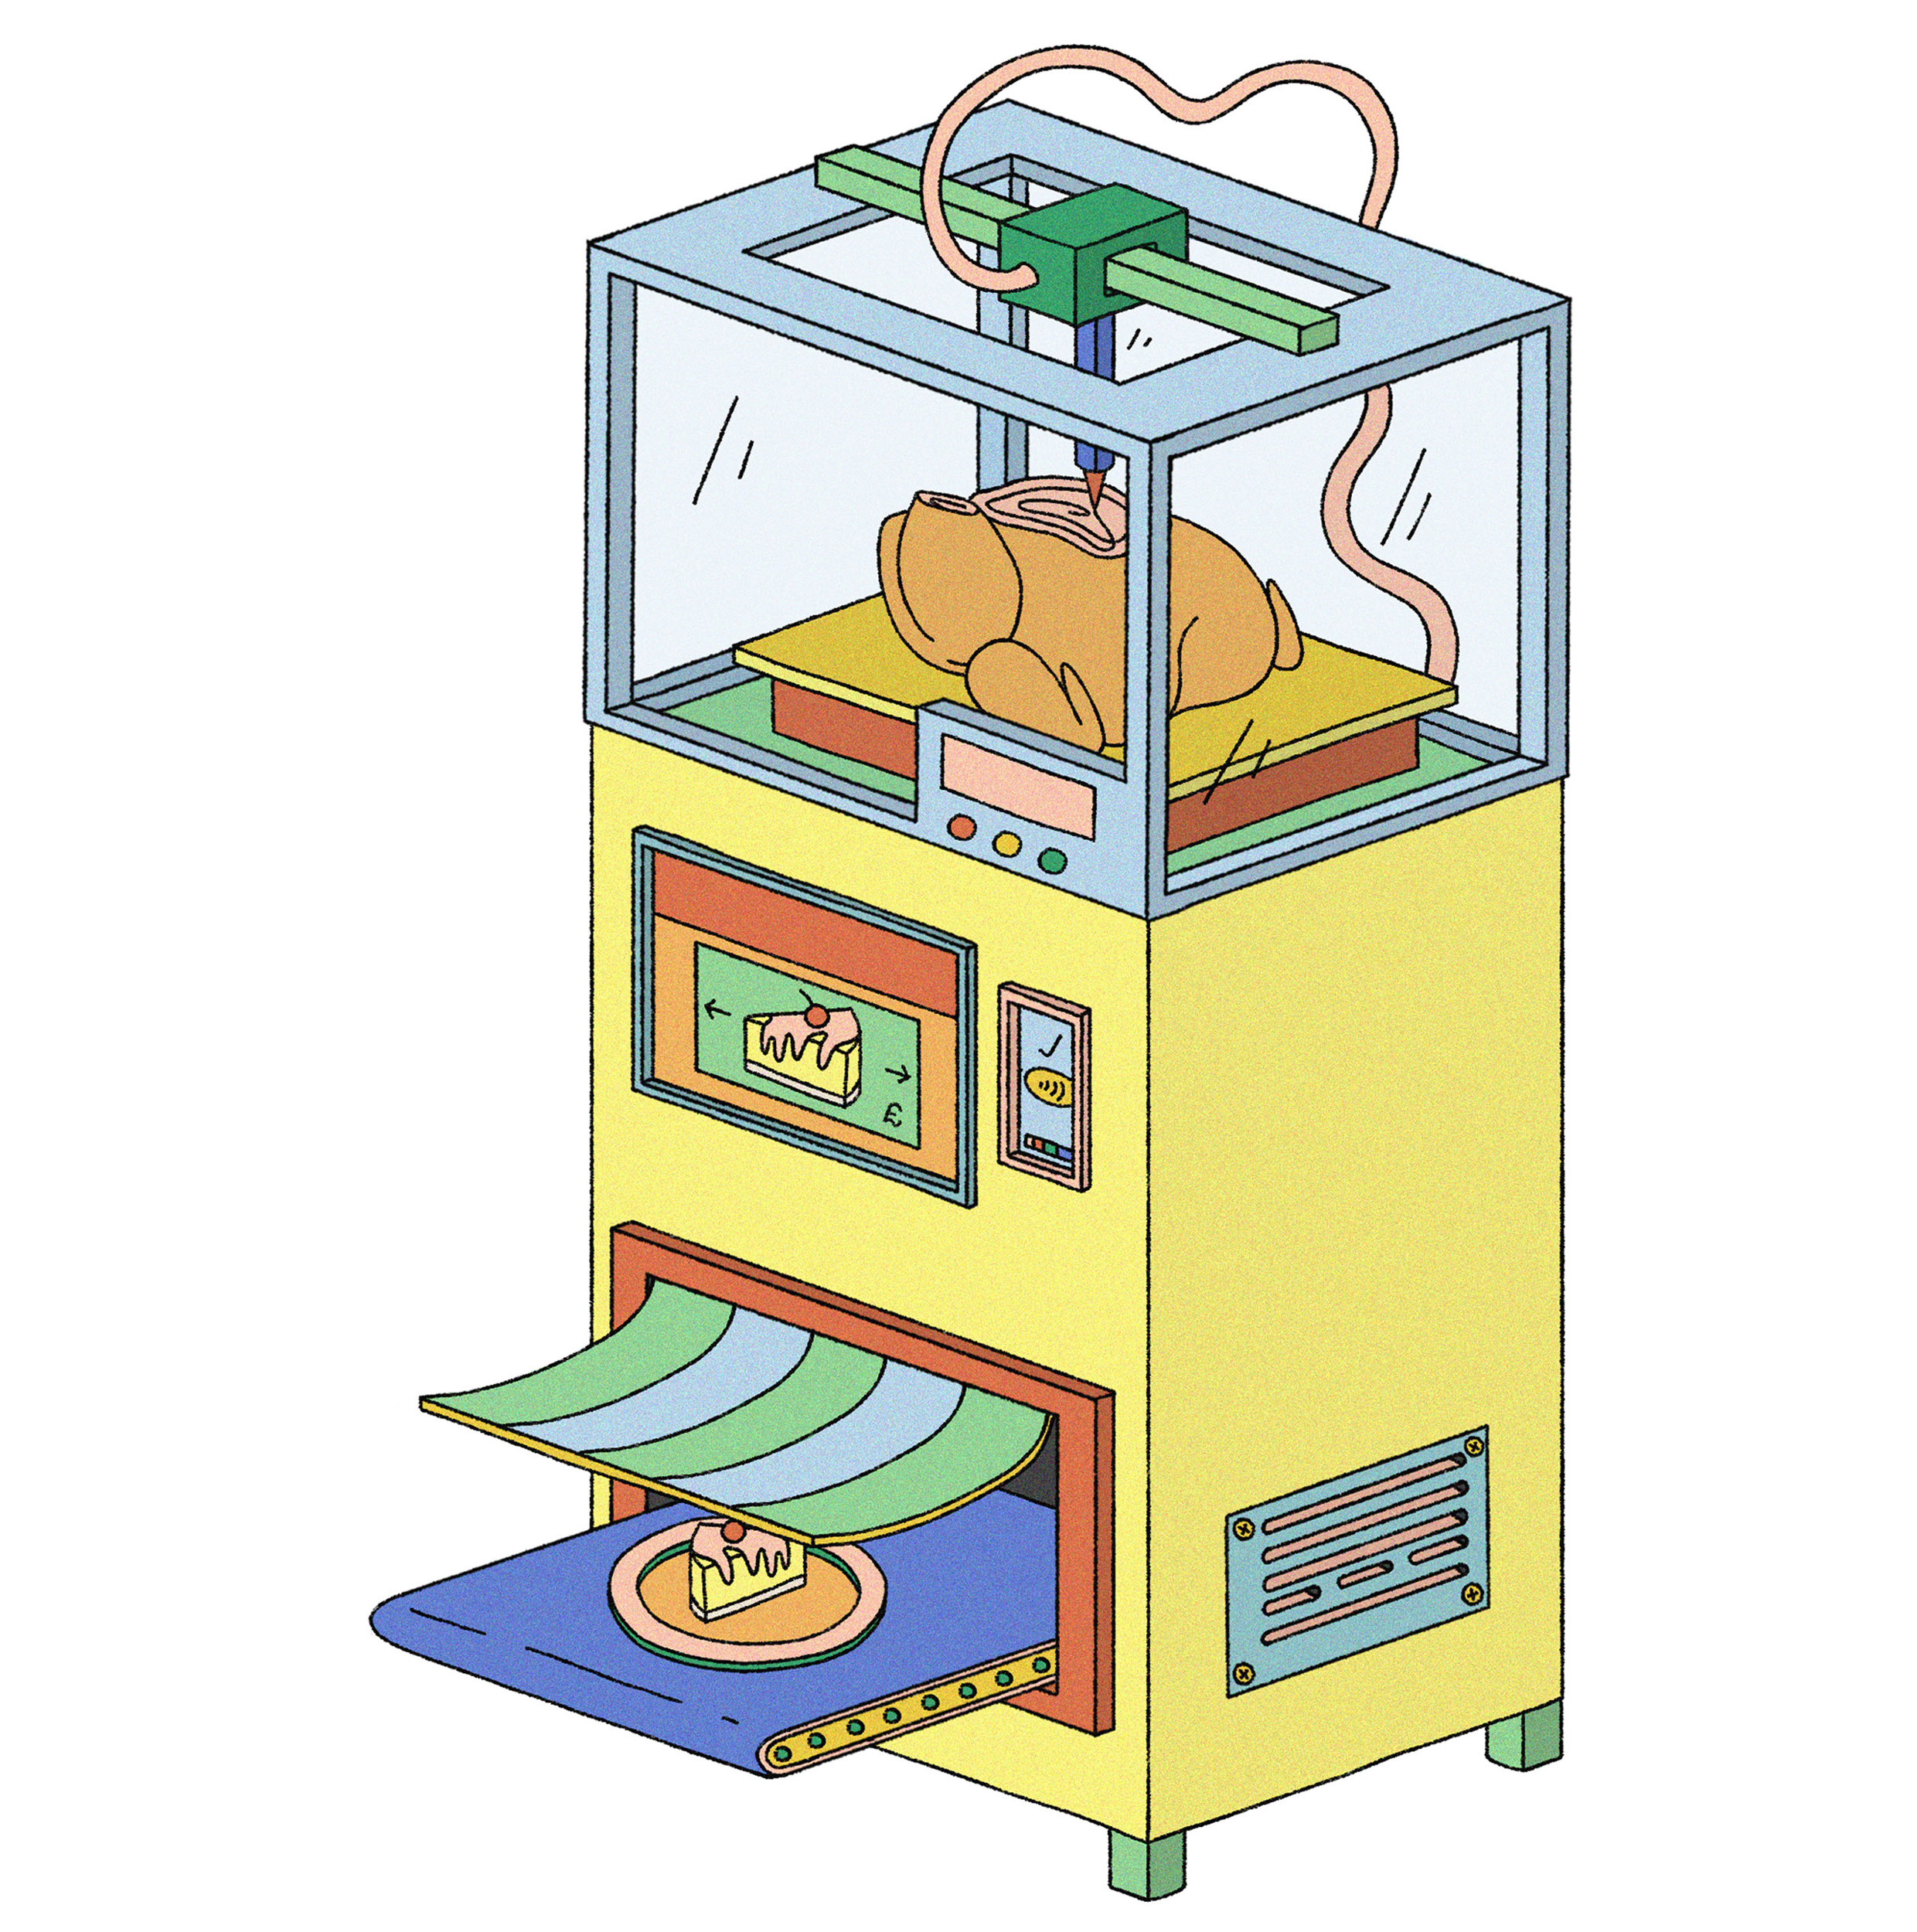 Illustration work by Becca Blake showing a chicken and a cheesecake being 3D printed by a vending machine.